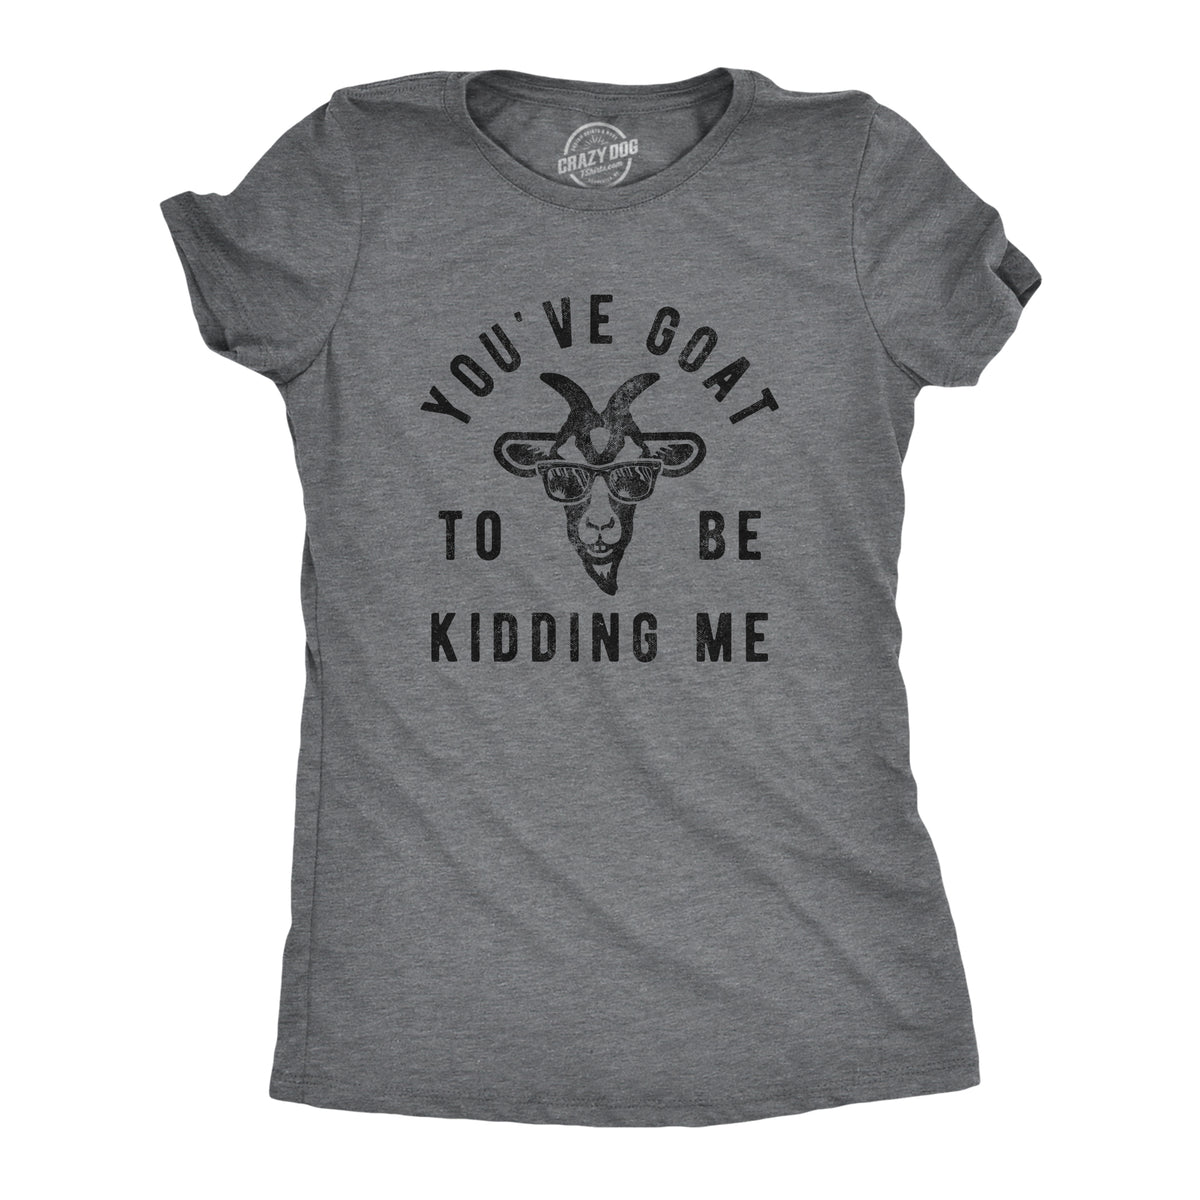 Funny Dark Heather Grey Youve Goat To Be Kidding Me Womens T Shirt Nerdy animal Tee